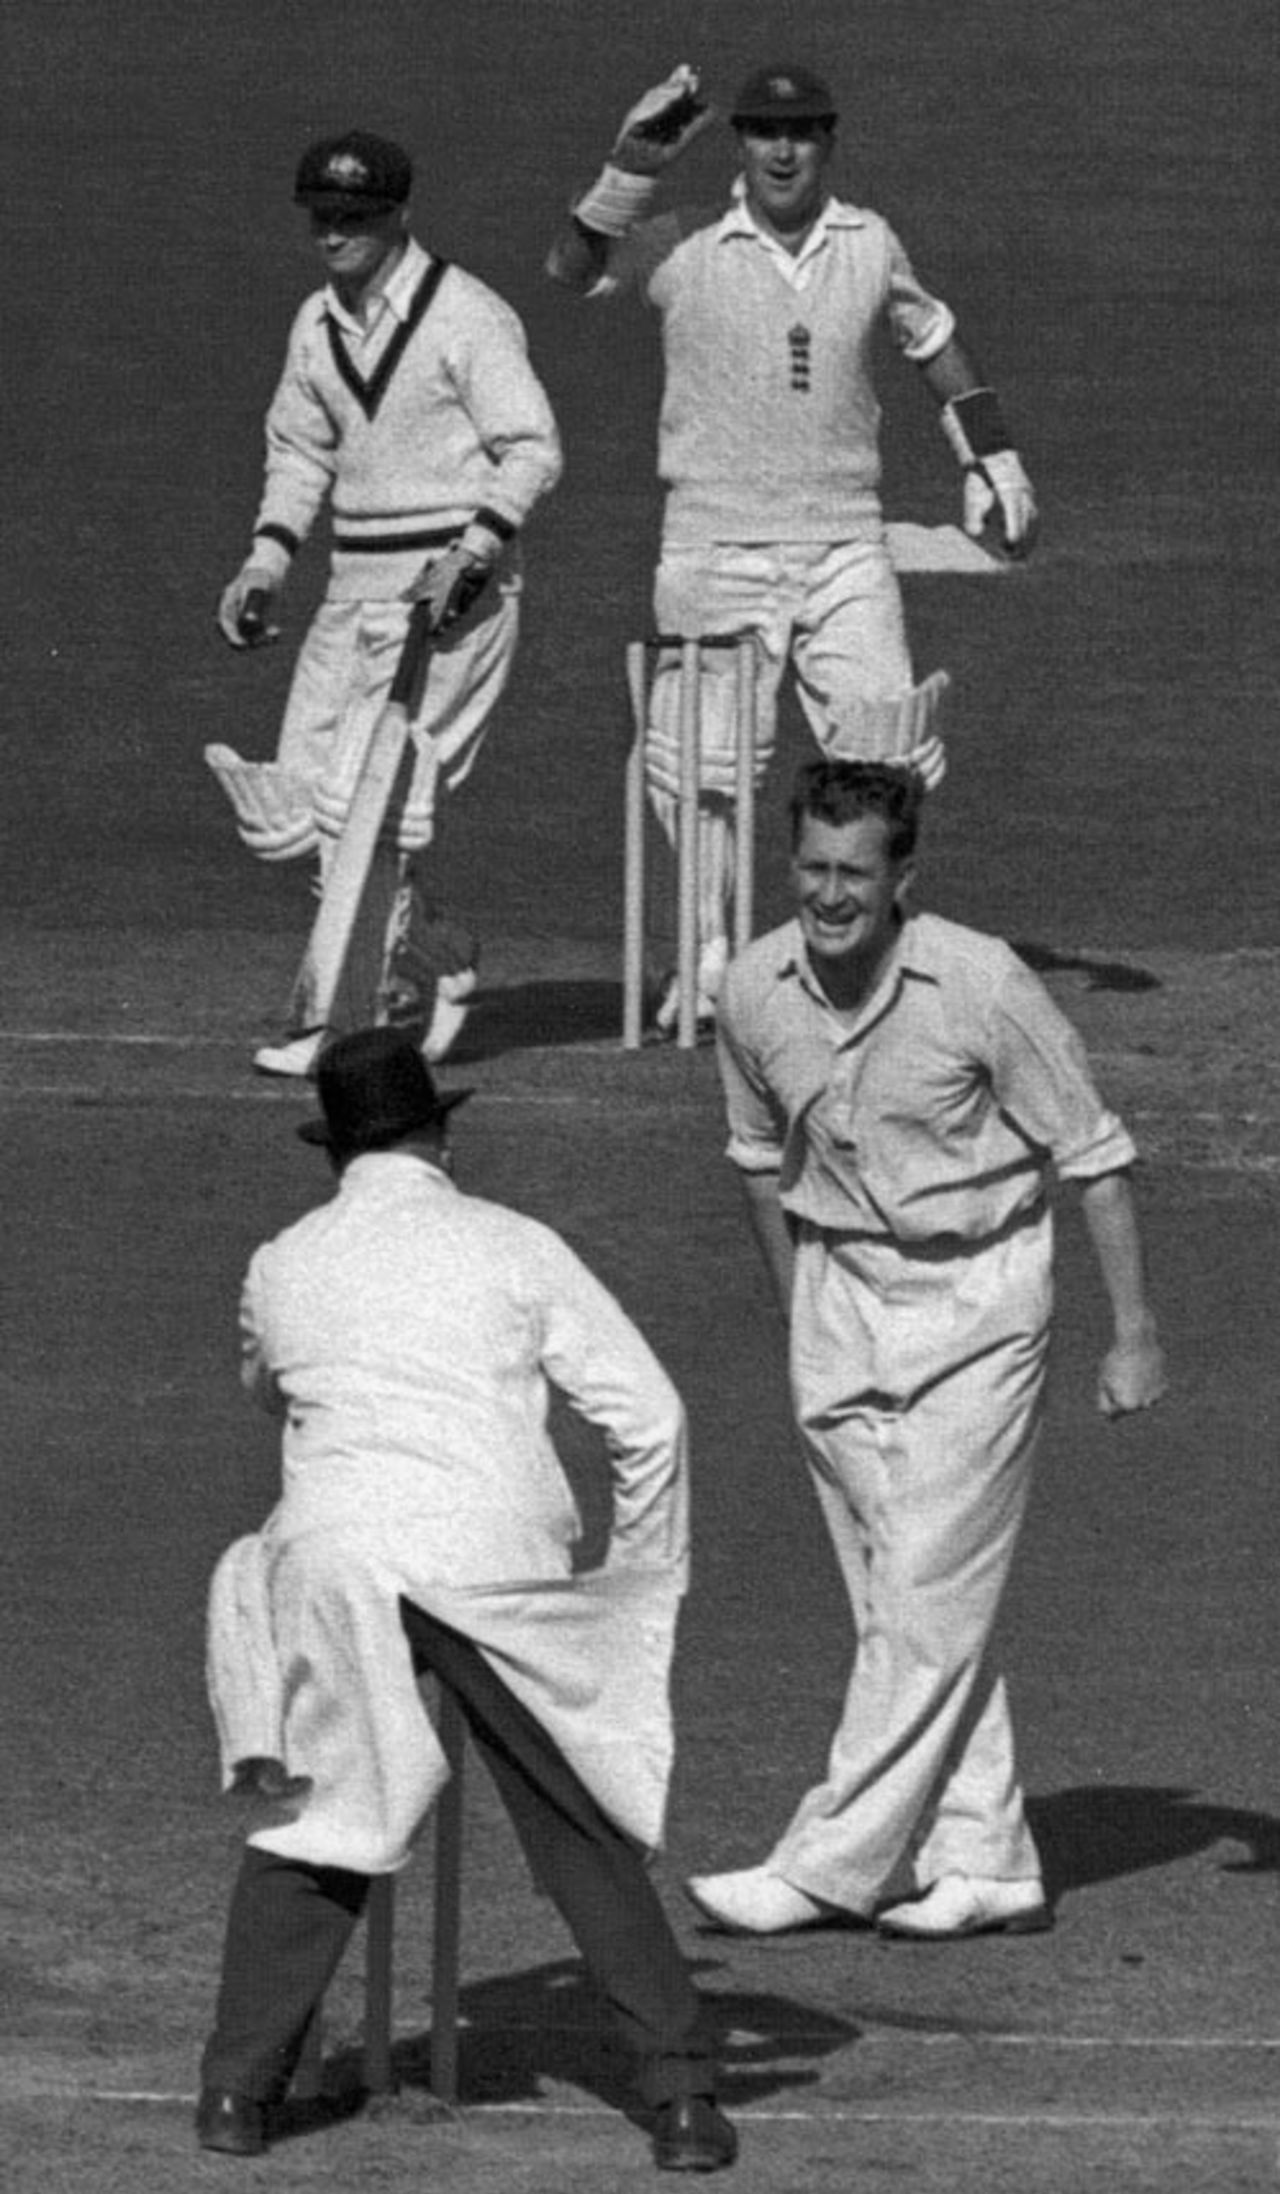 Jim Laker completes his ten-for as Len Maddocks is trapped lbw, England v Australia, Manchester, July 31, 1956